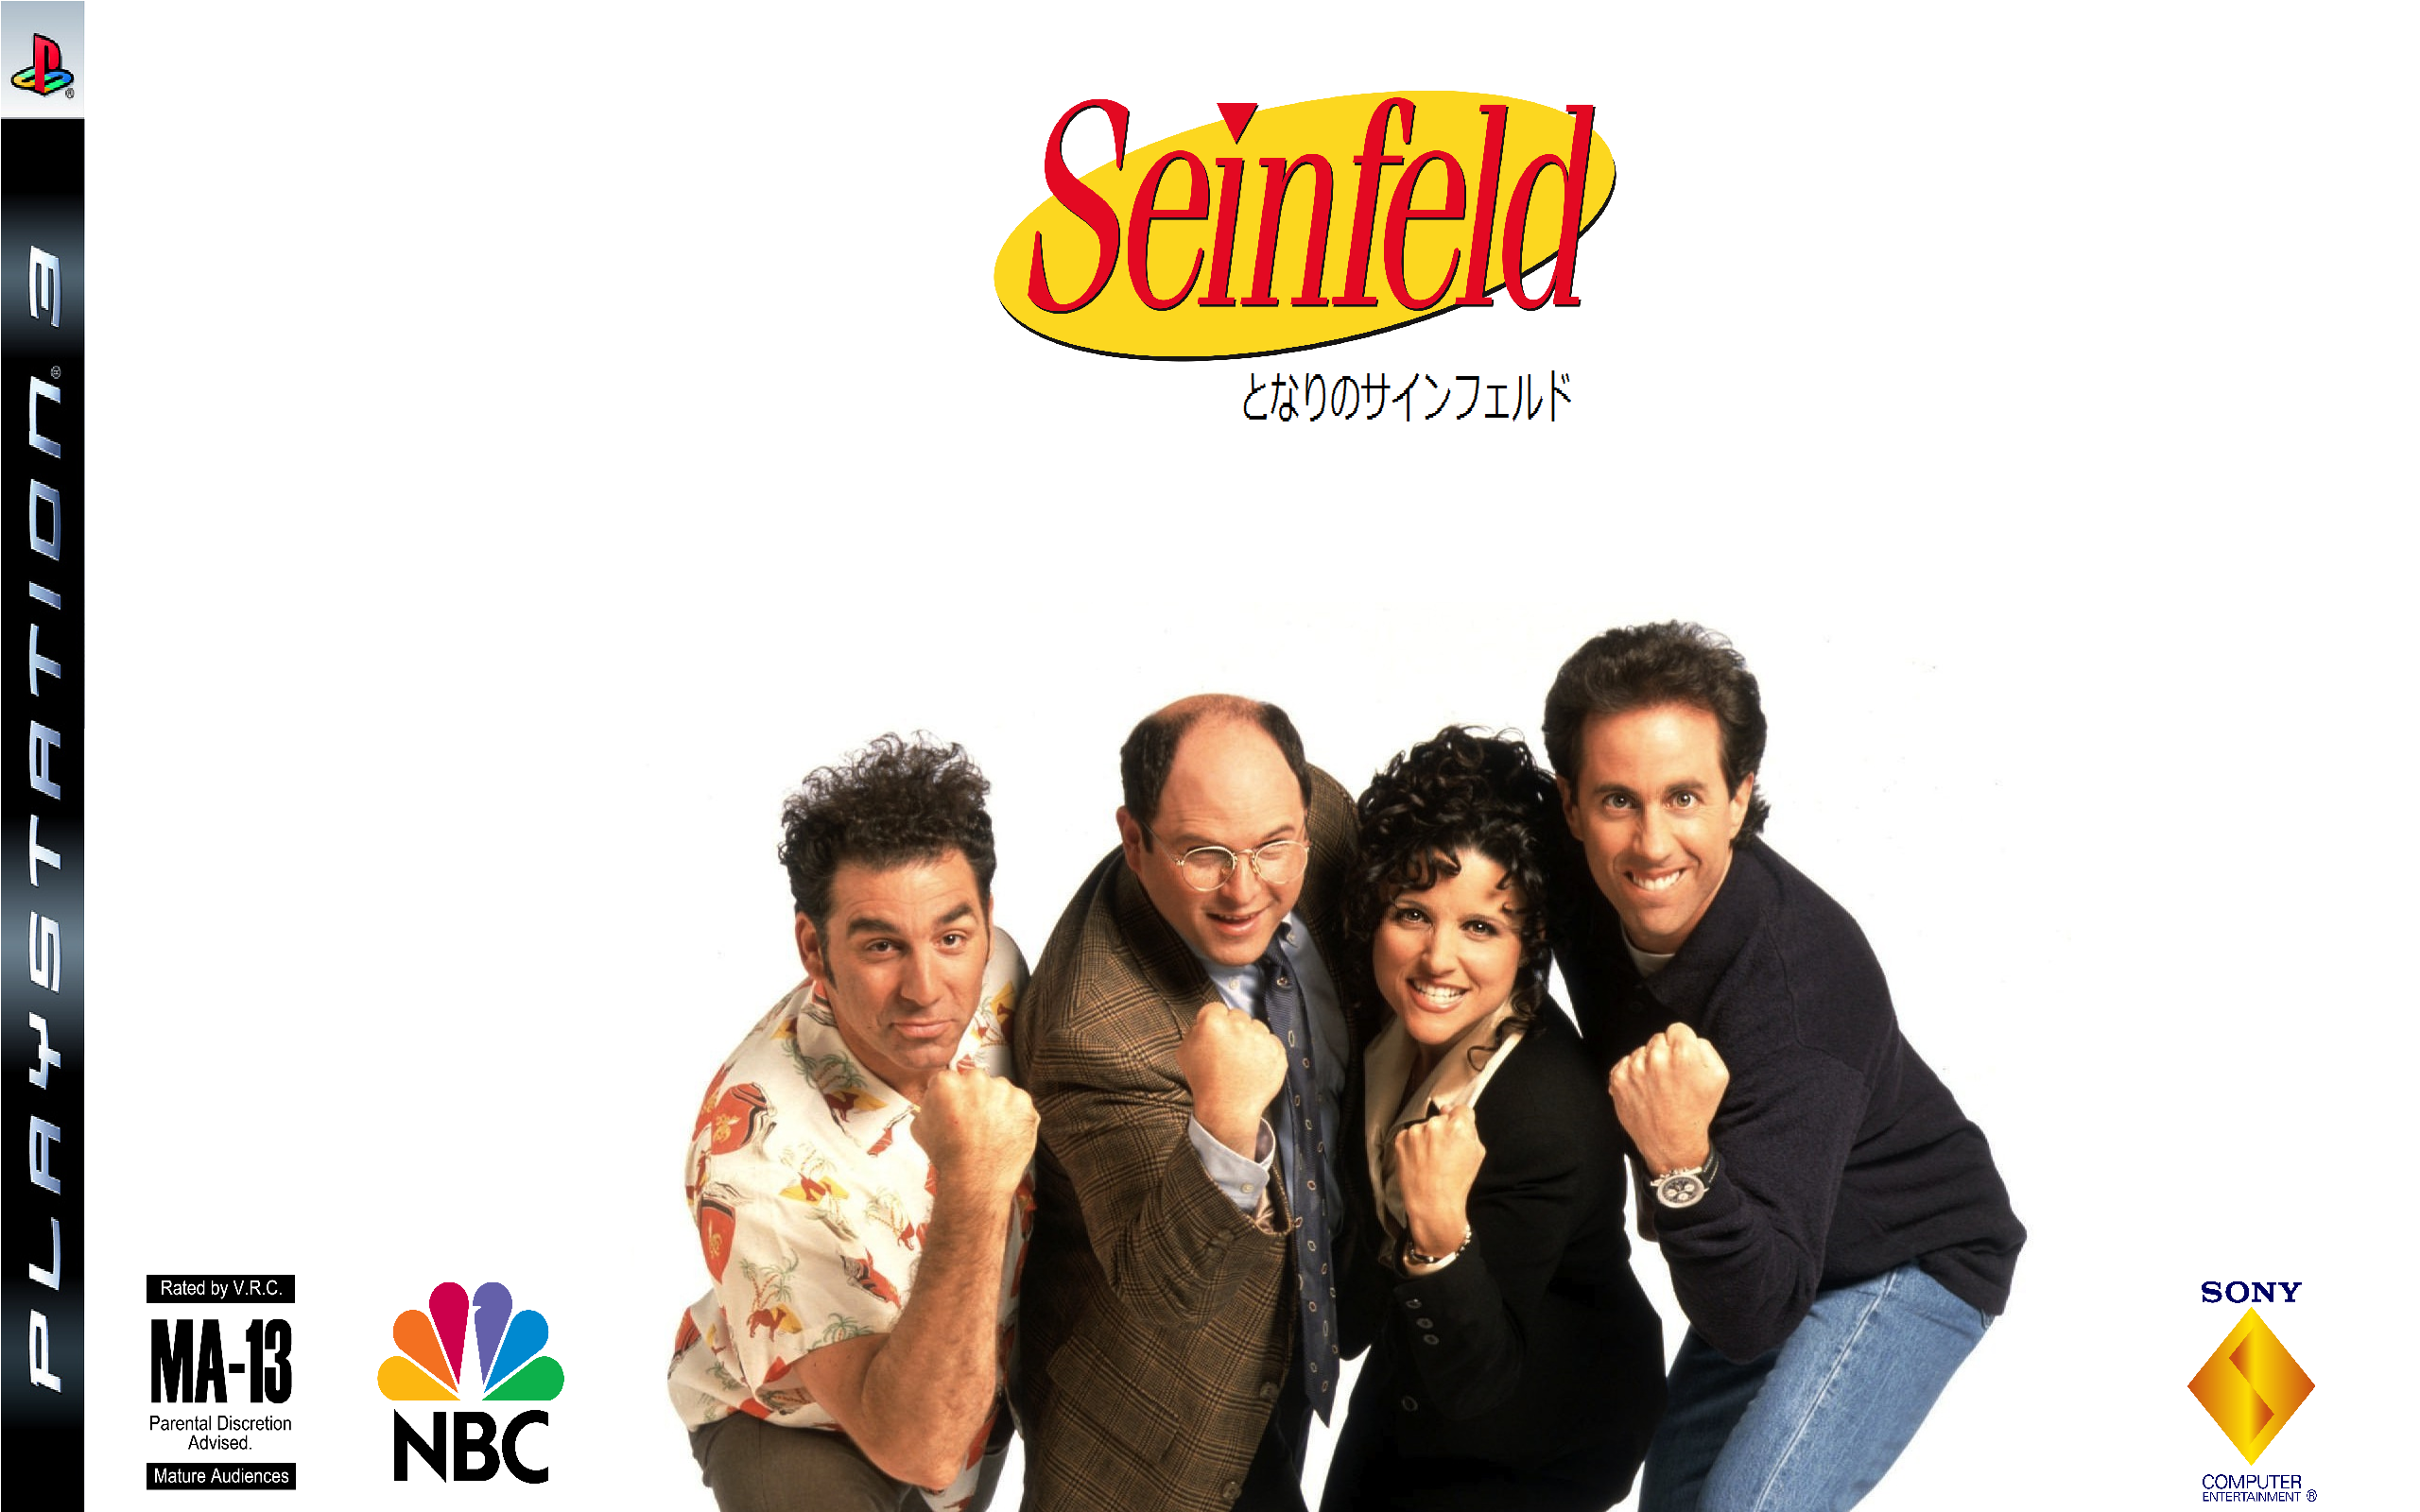 Seinfeld PlayStation 03 Boxart Wide Front Cover by Royameadow